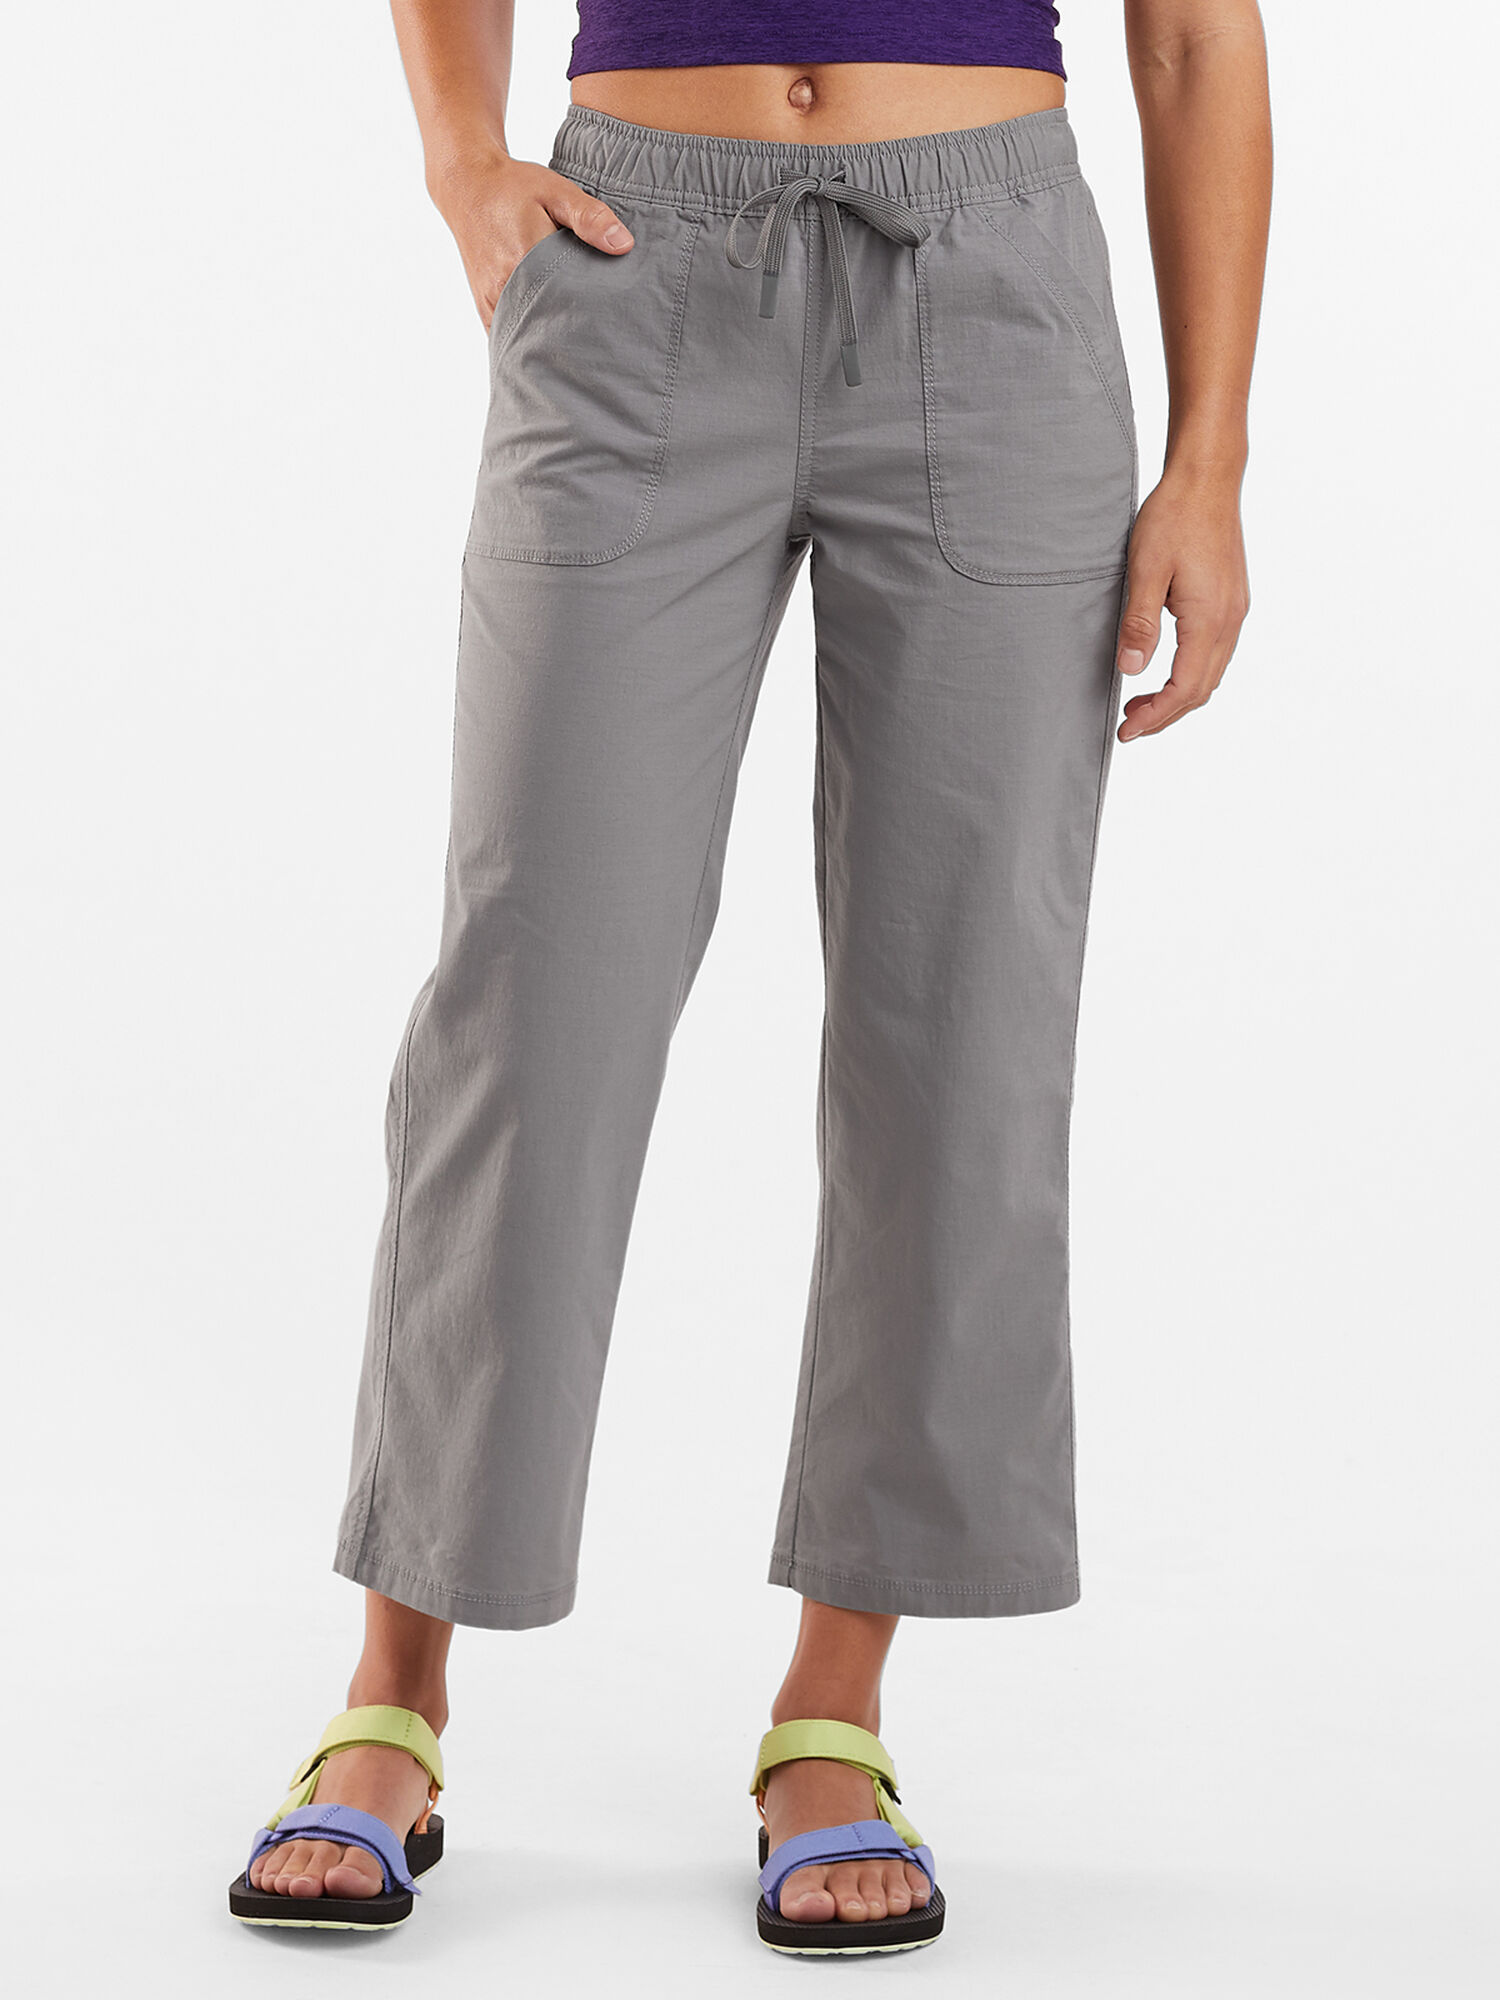 Women's Ankle Pants Hiking: Scout Ripstop | Title Nine